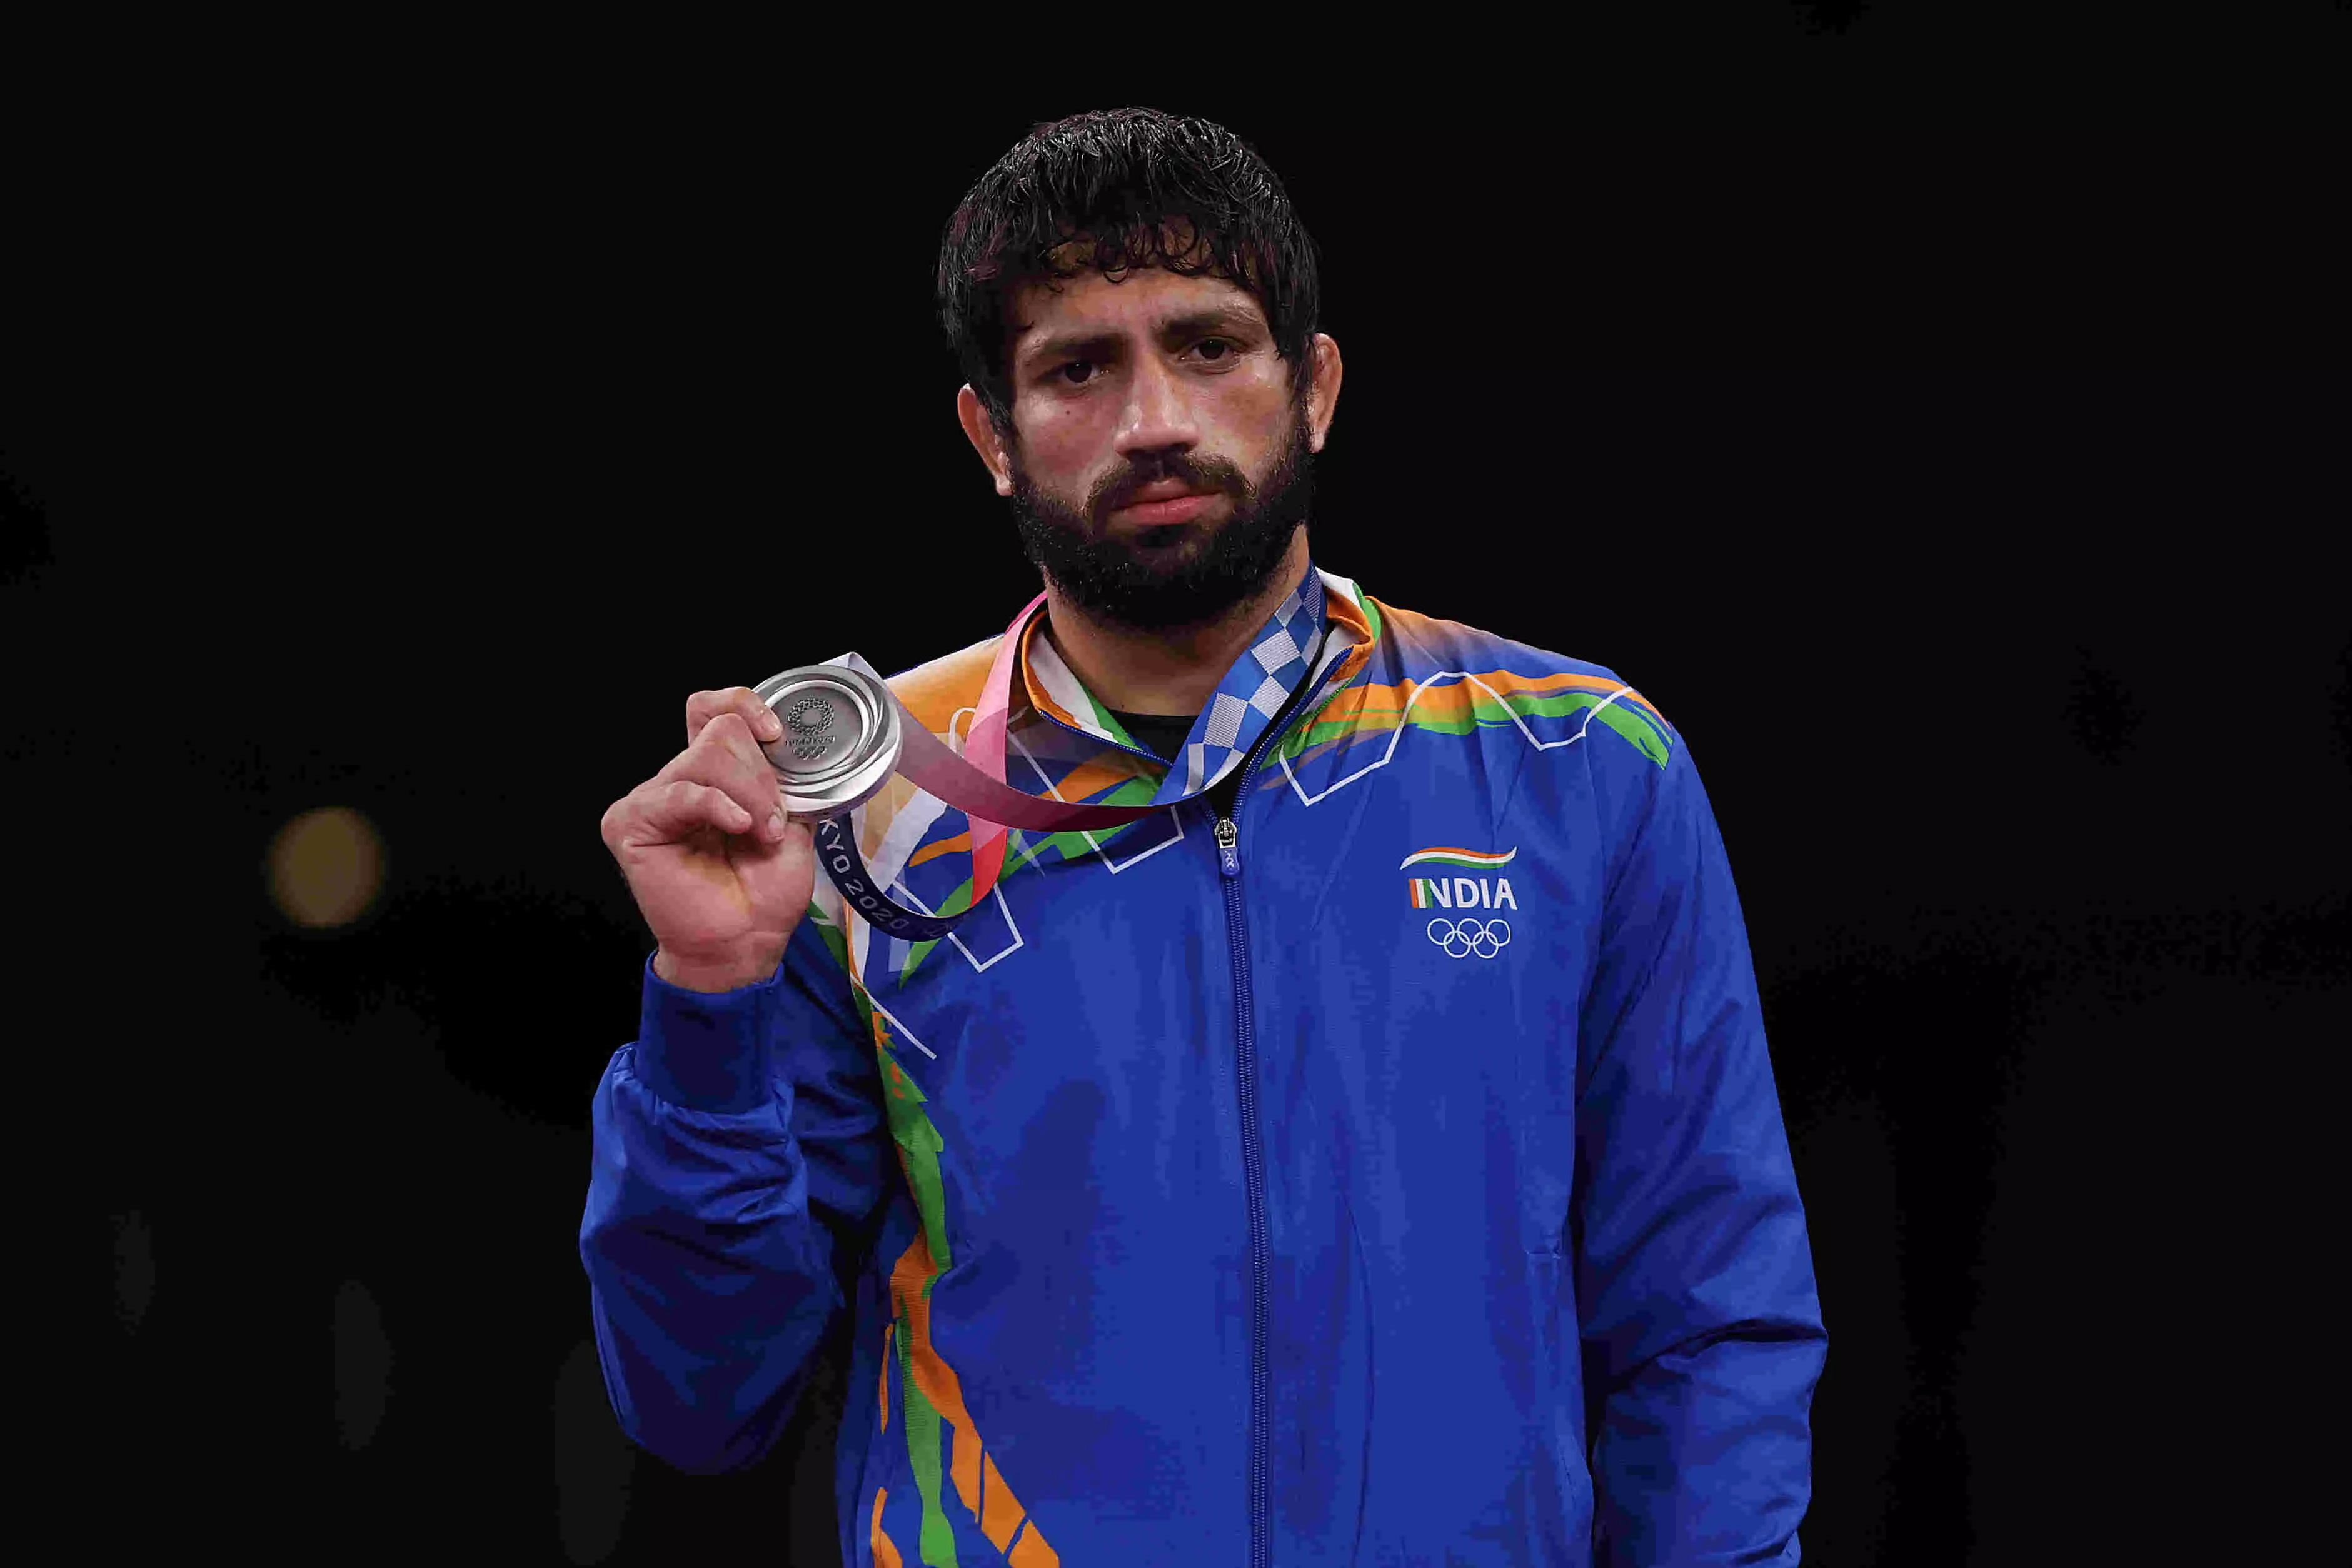 The young talented grappler for India with a bright future with his Olympic medal (Source: Getty Images)